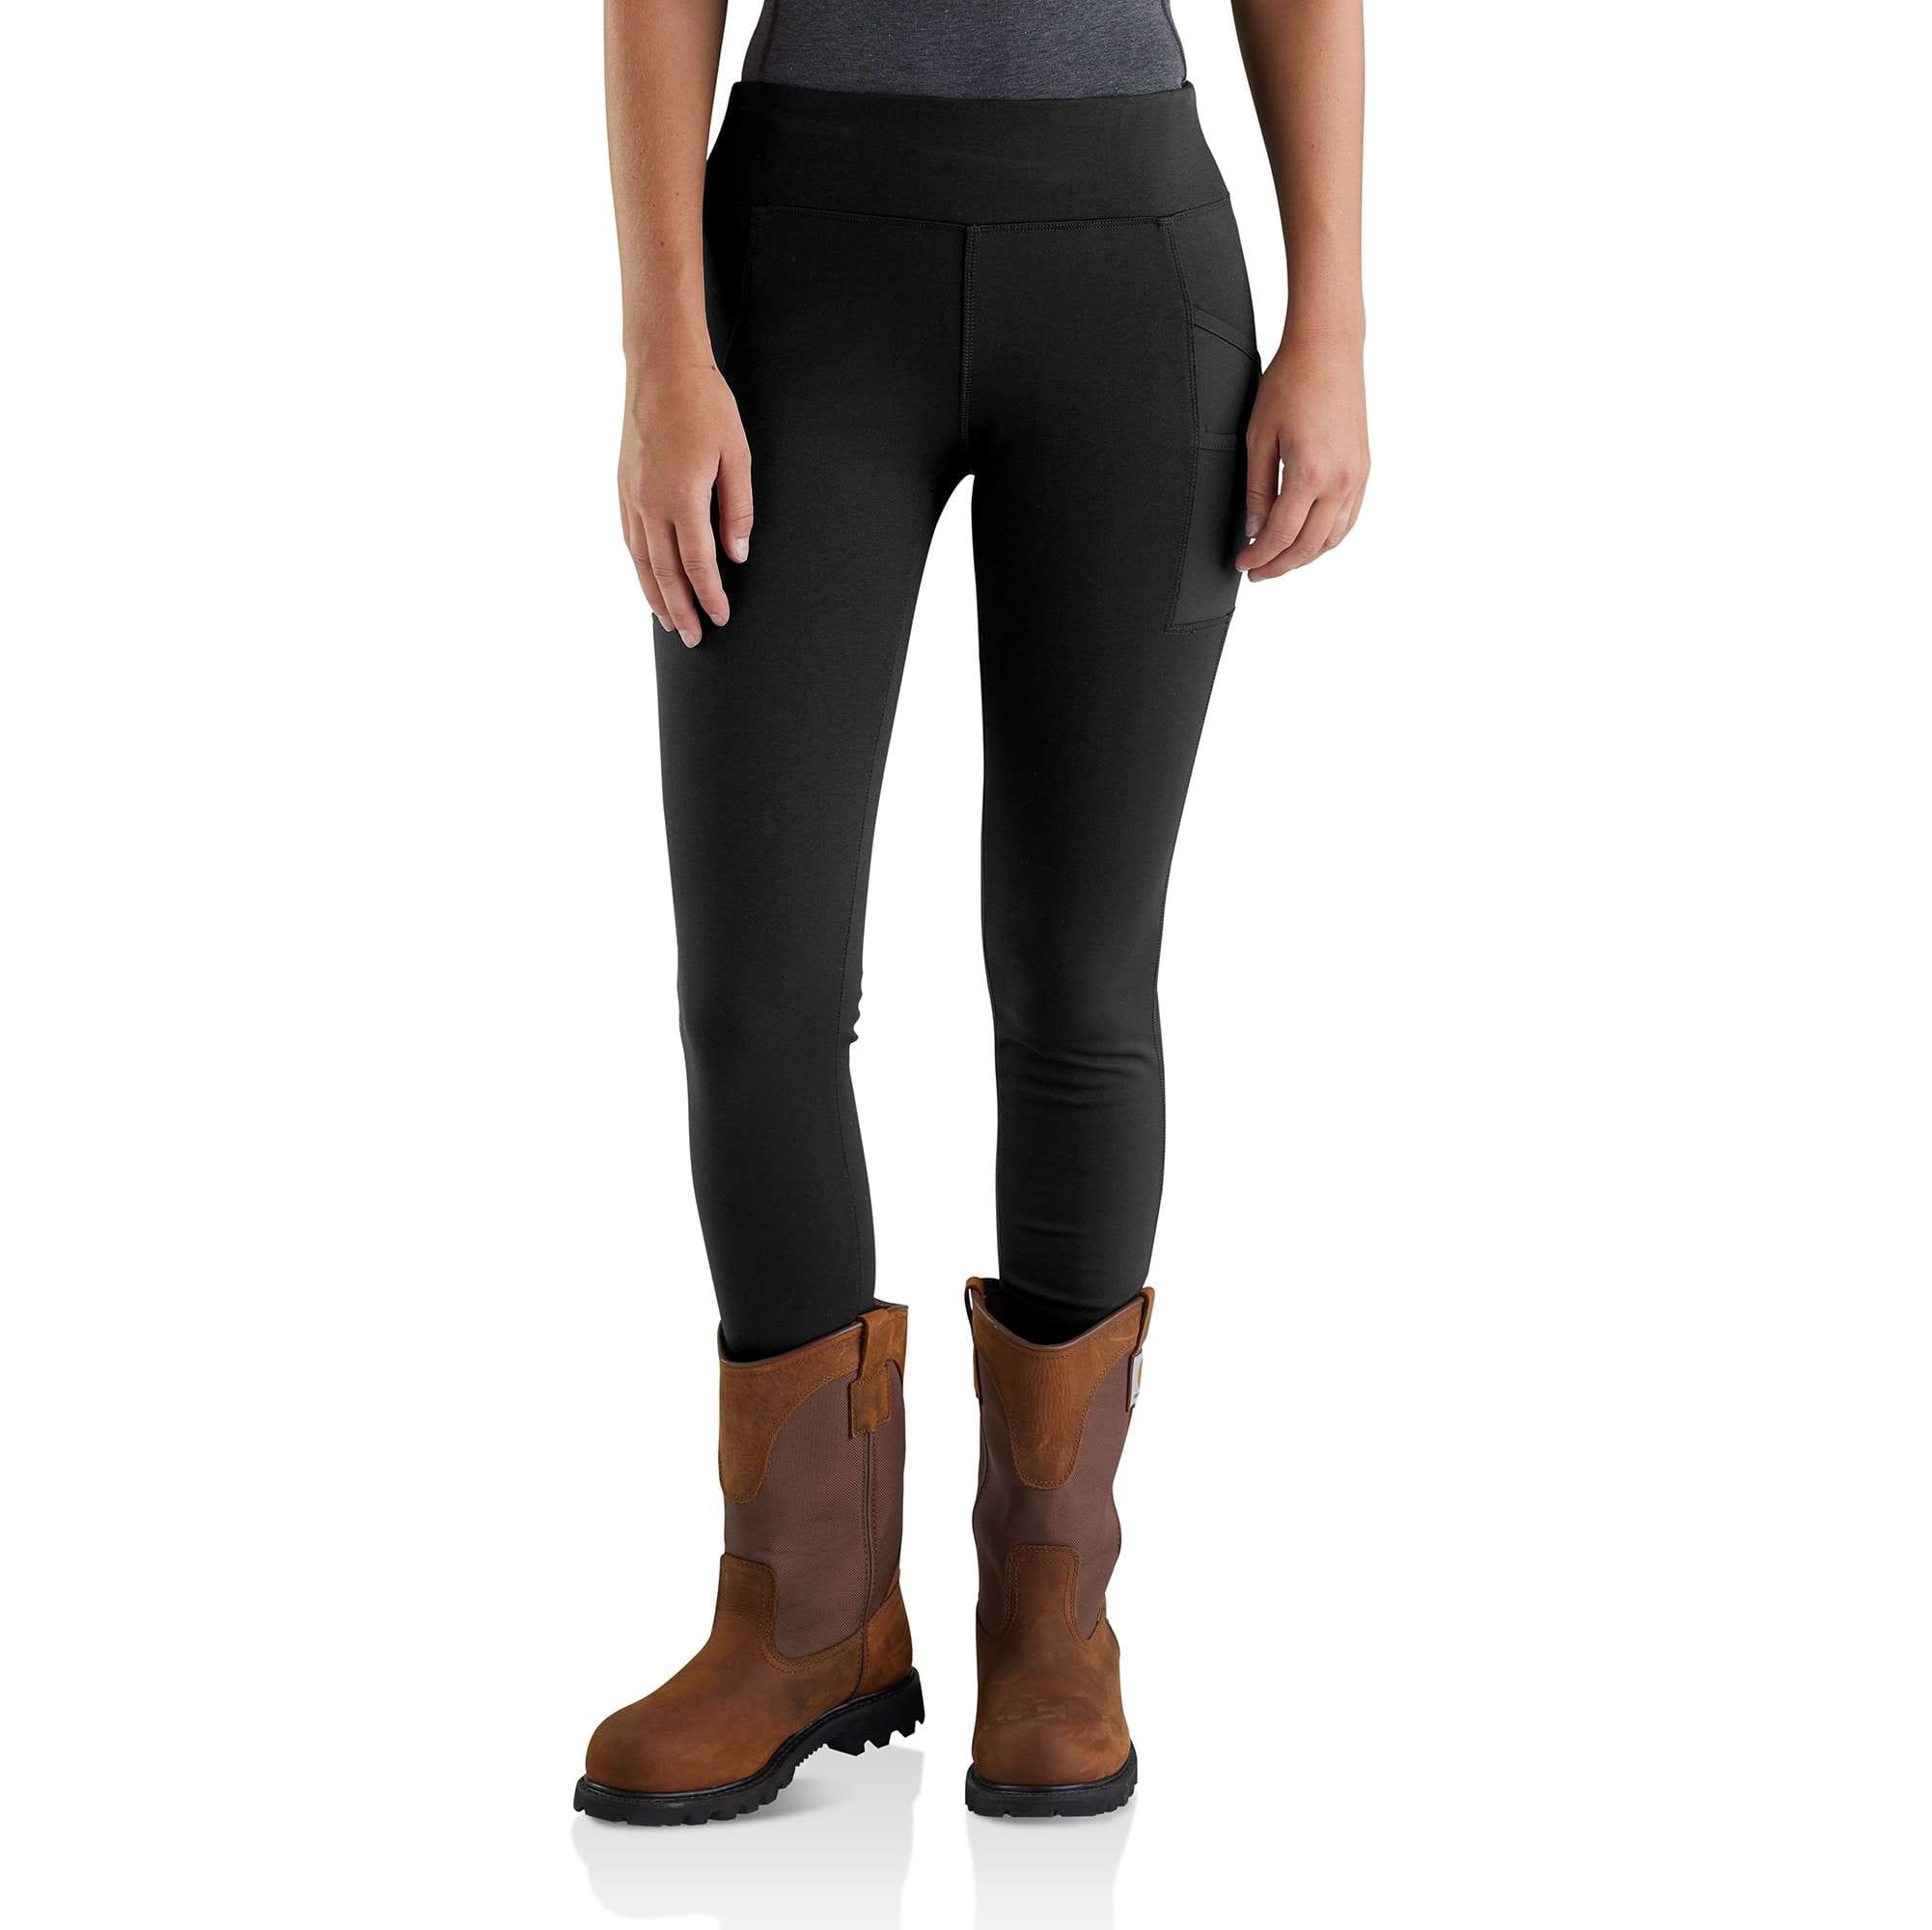 Carhartt Force® Fitted Heavyweight Lined Legging